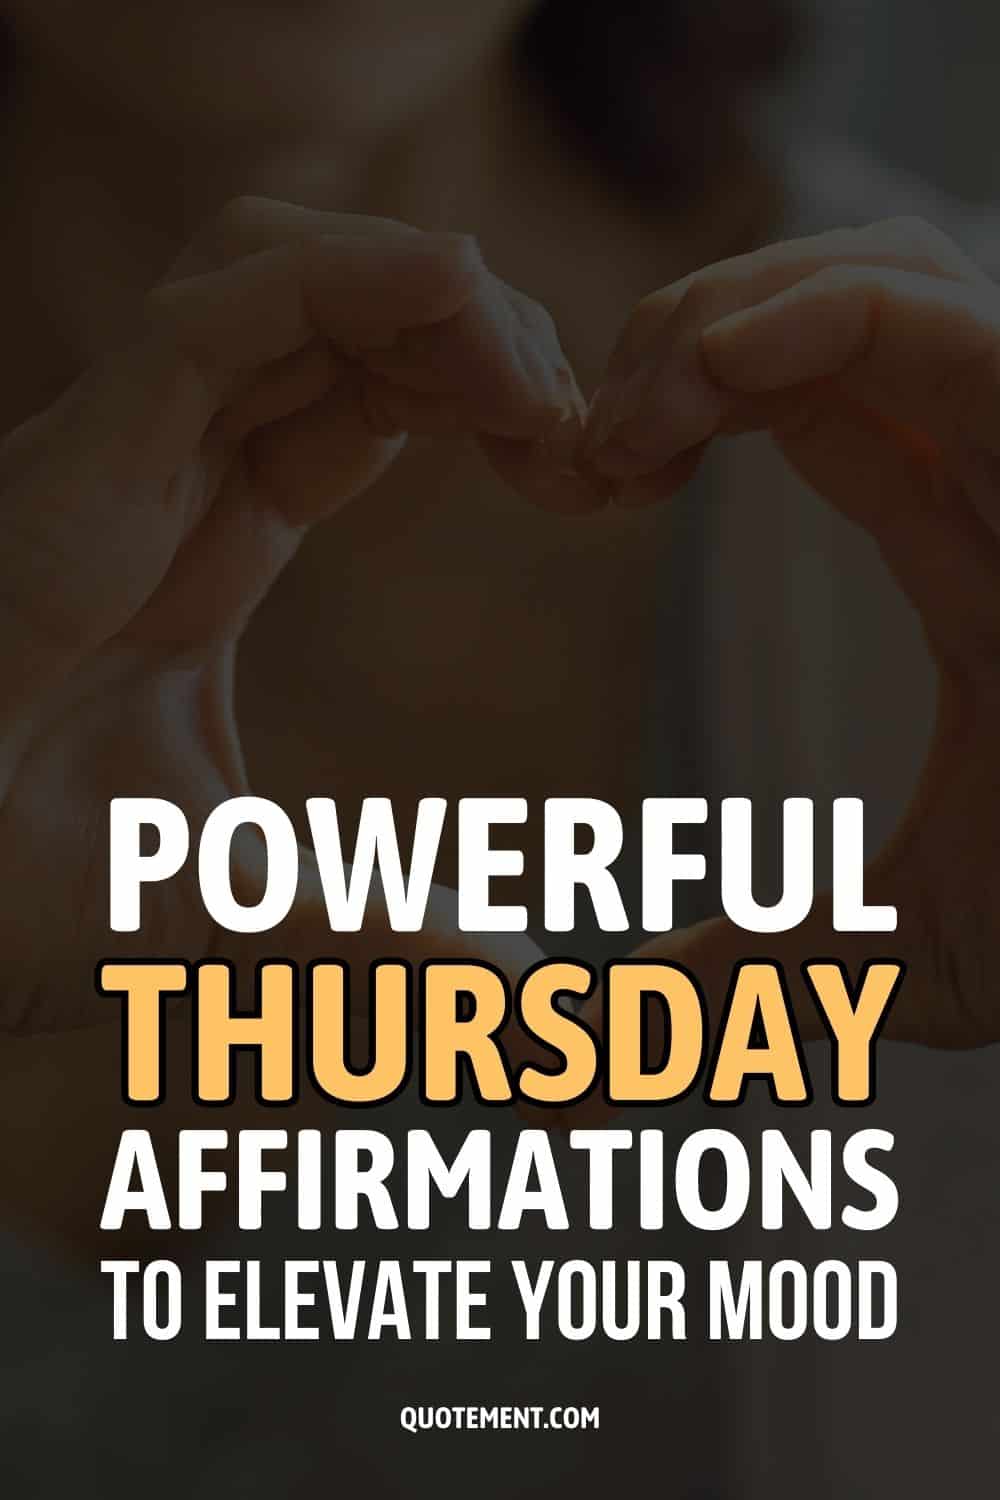 300 Powerful Thursday Affirmations To Elevate Your Mood
